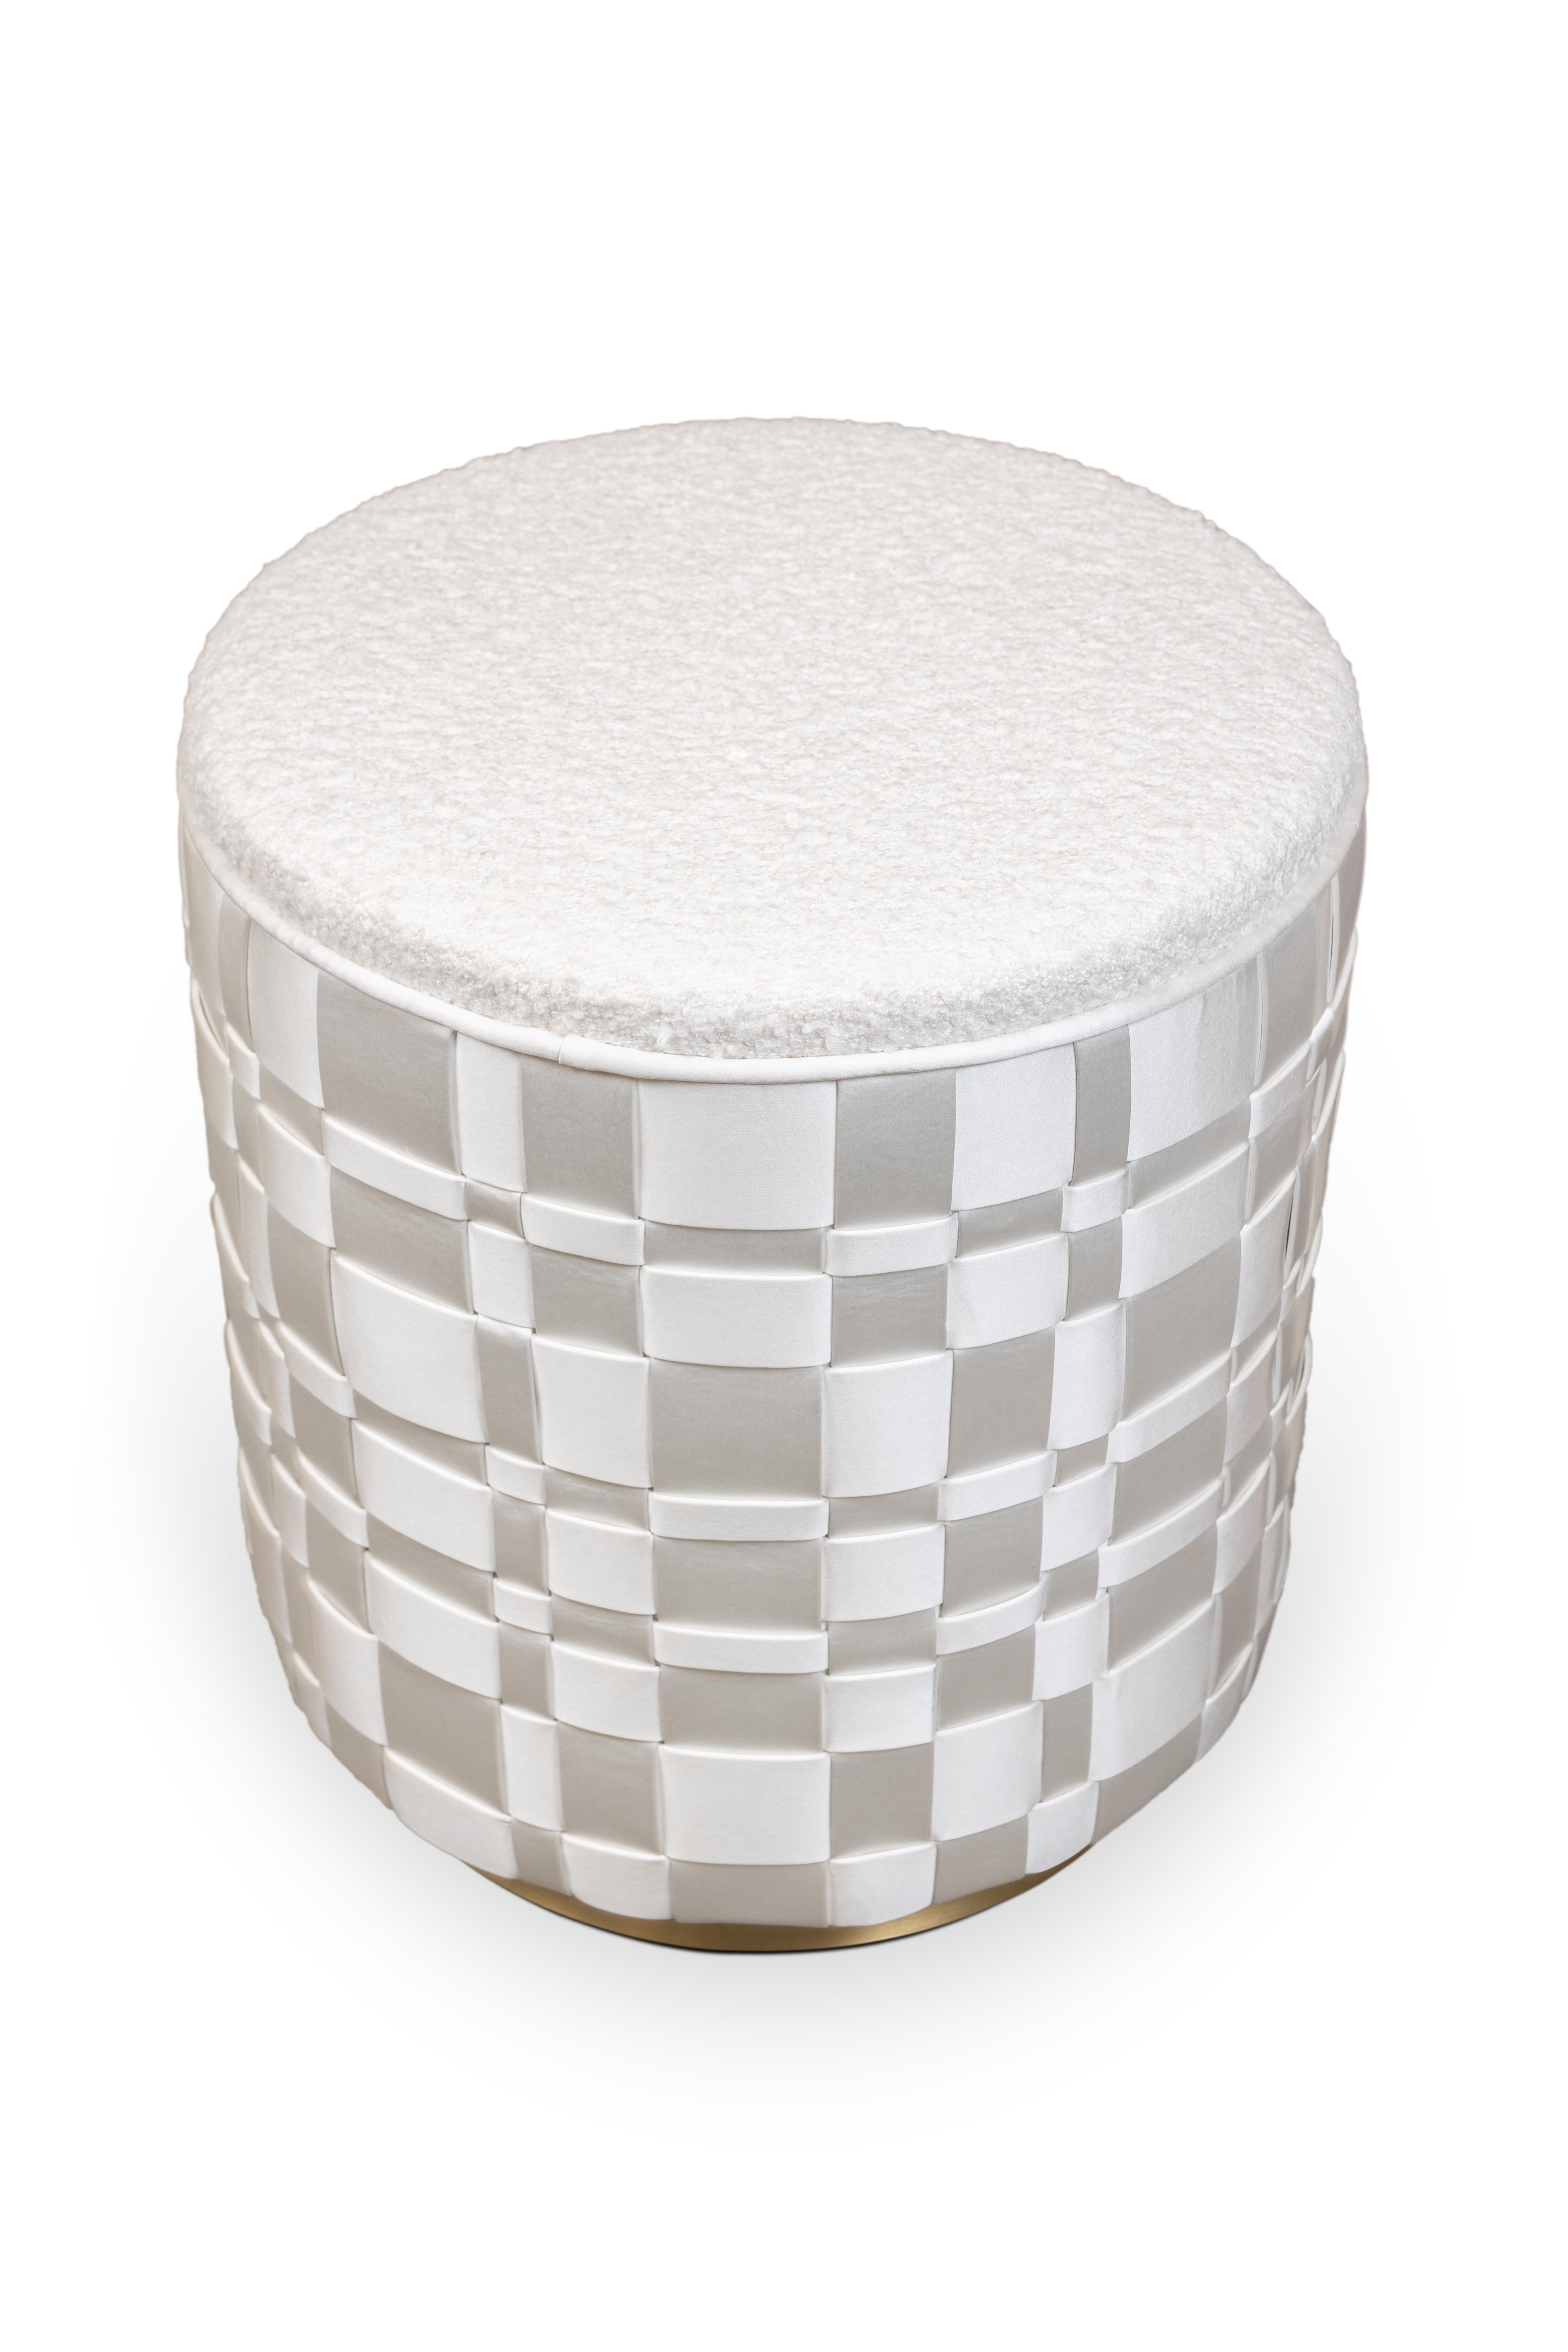 Other Grace Ottoman by Memoir Essence For Sale